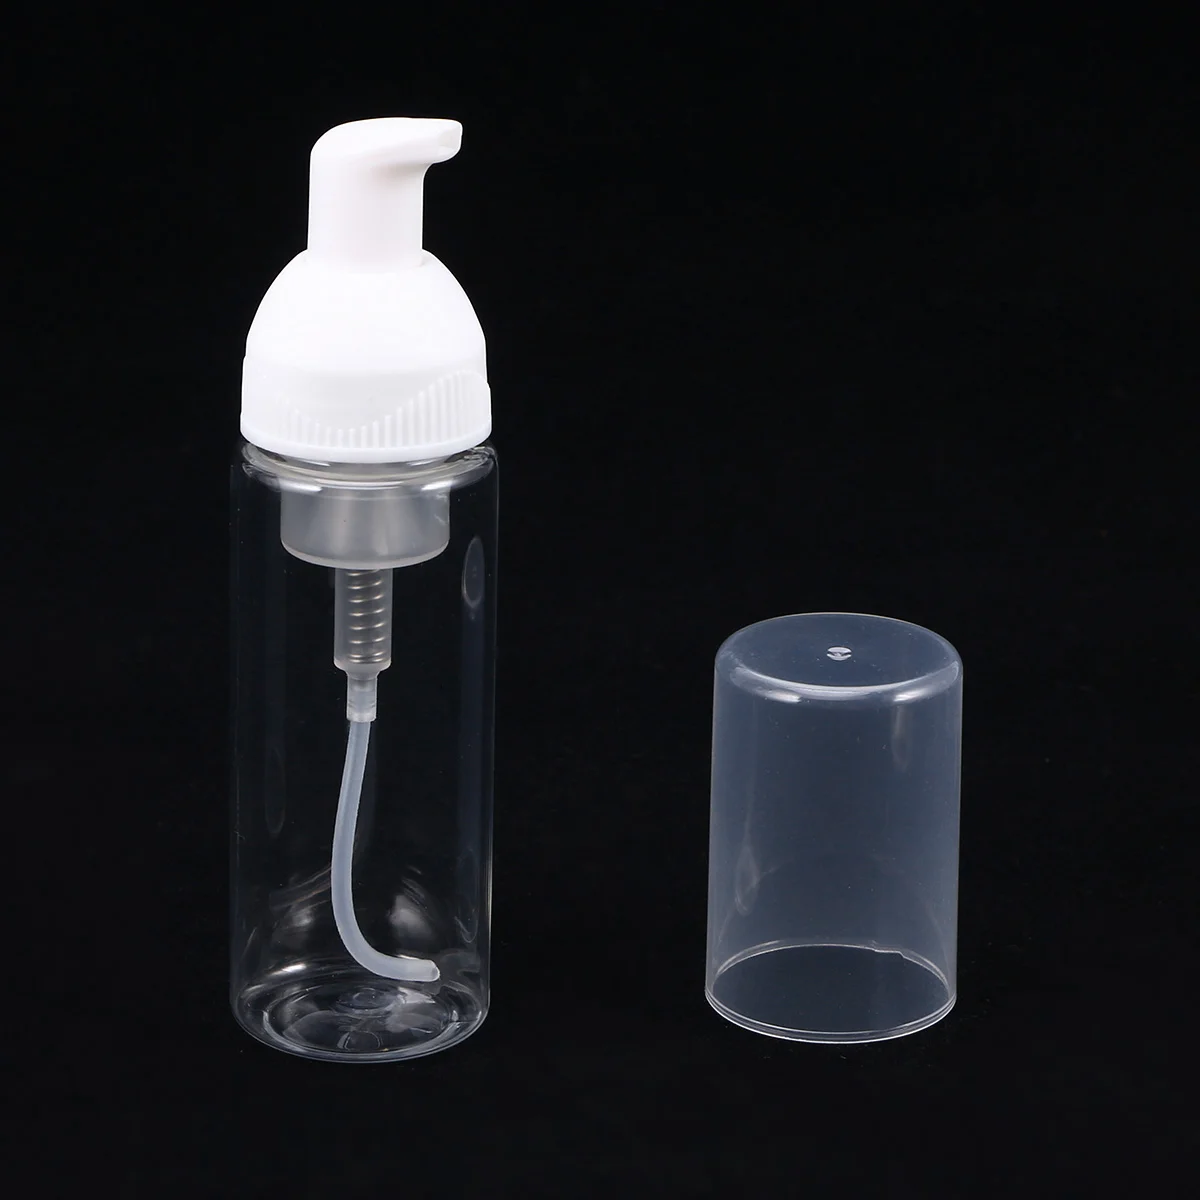 

10 50ml Empty Foaming Pump Bottle Refillable Dispenser Bottle for Cleaning Travel Outdoor Supplies